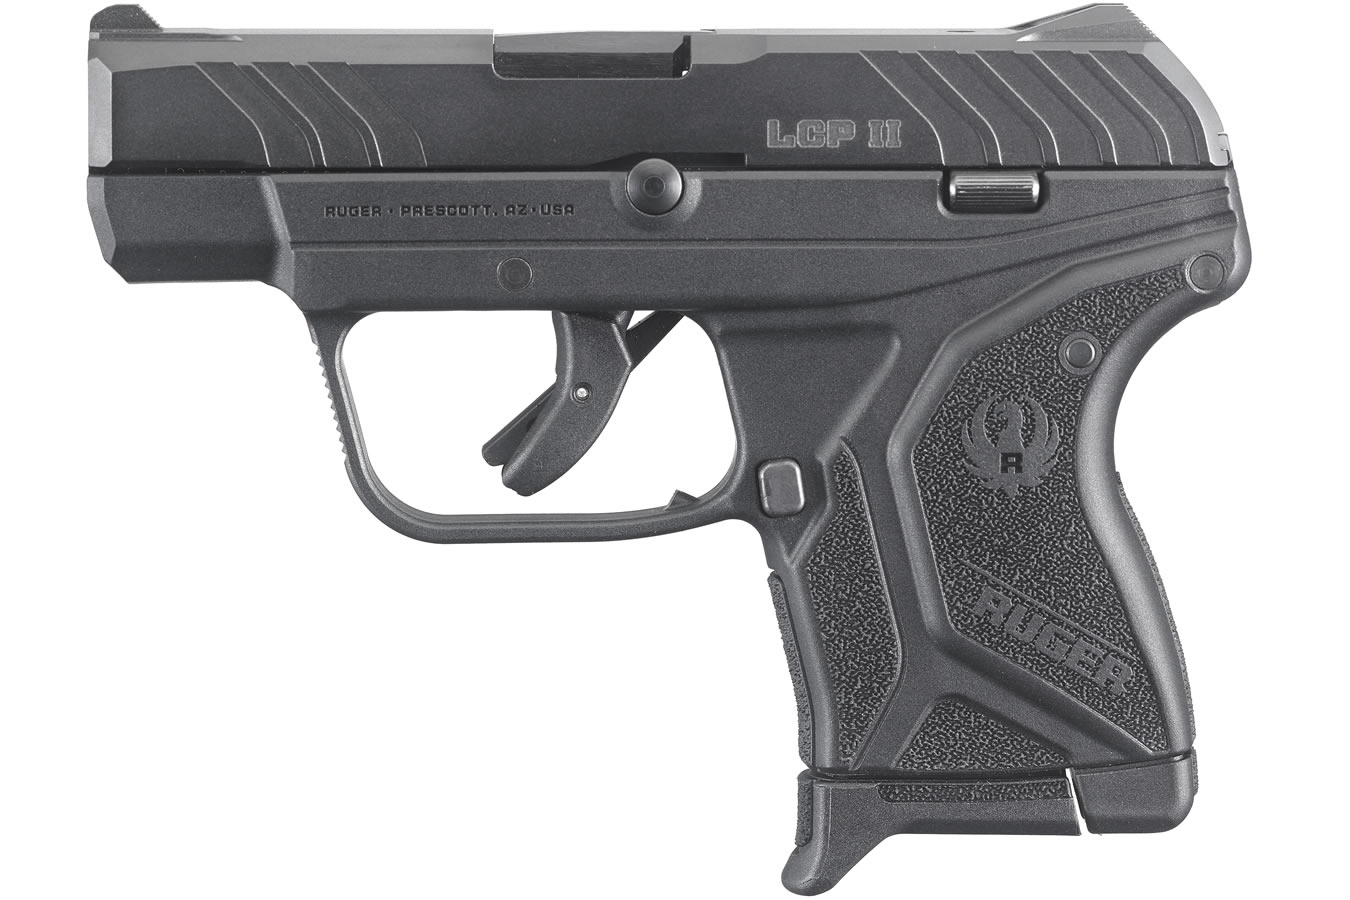 No. 5 Best Selling: RUGER LCP II 380 ACP BLACK PISTOL 2.75 IN BBL 